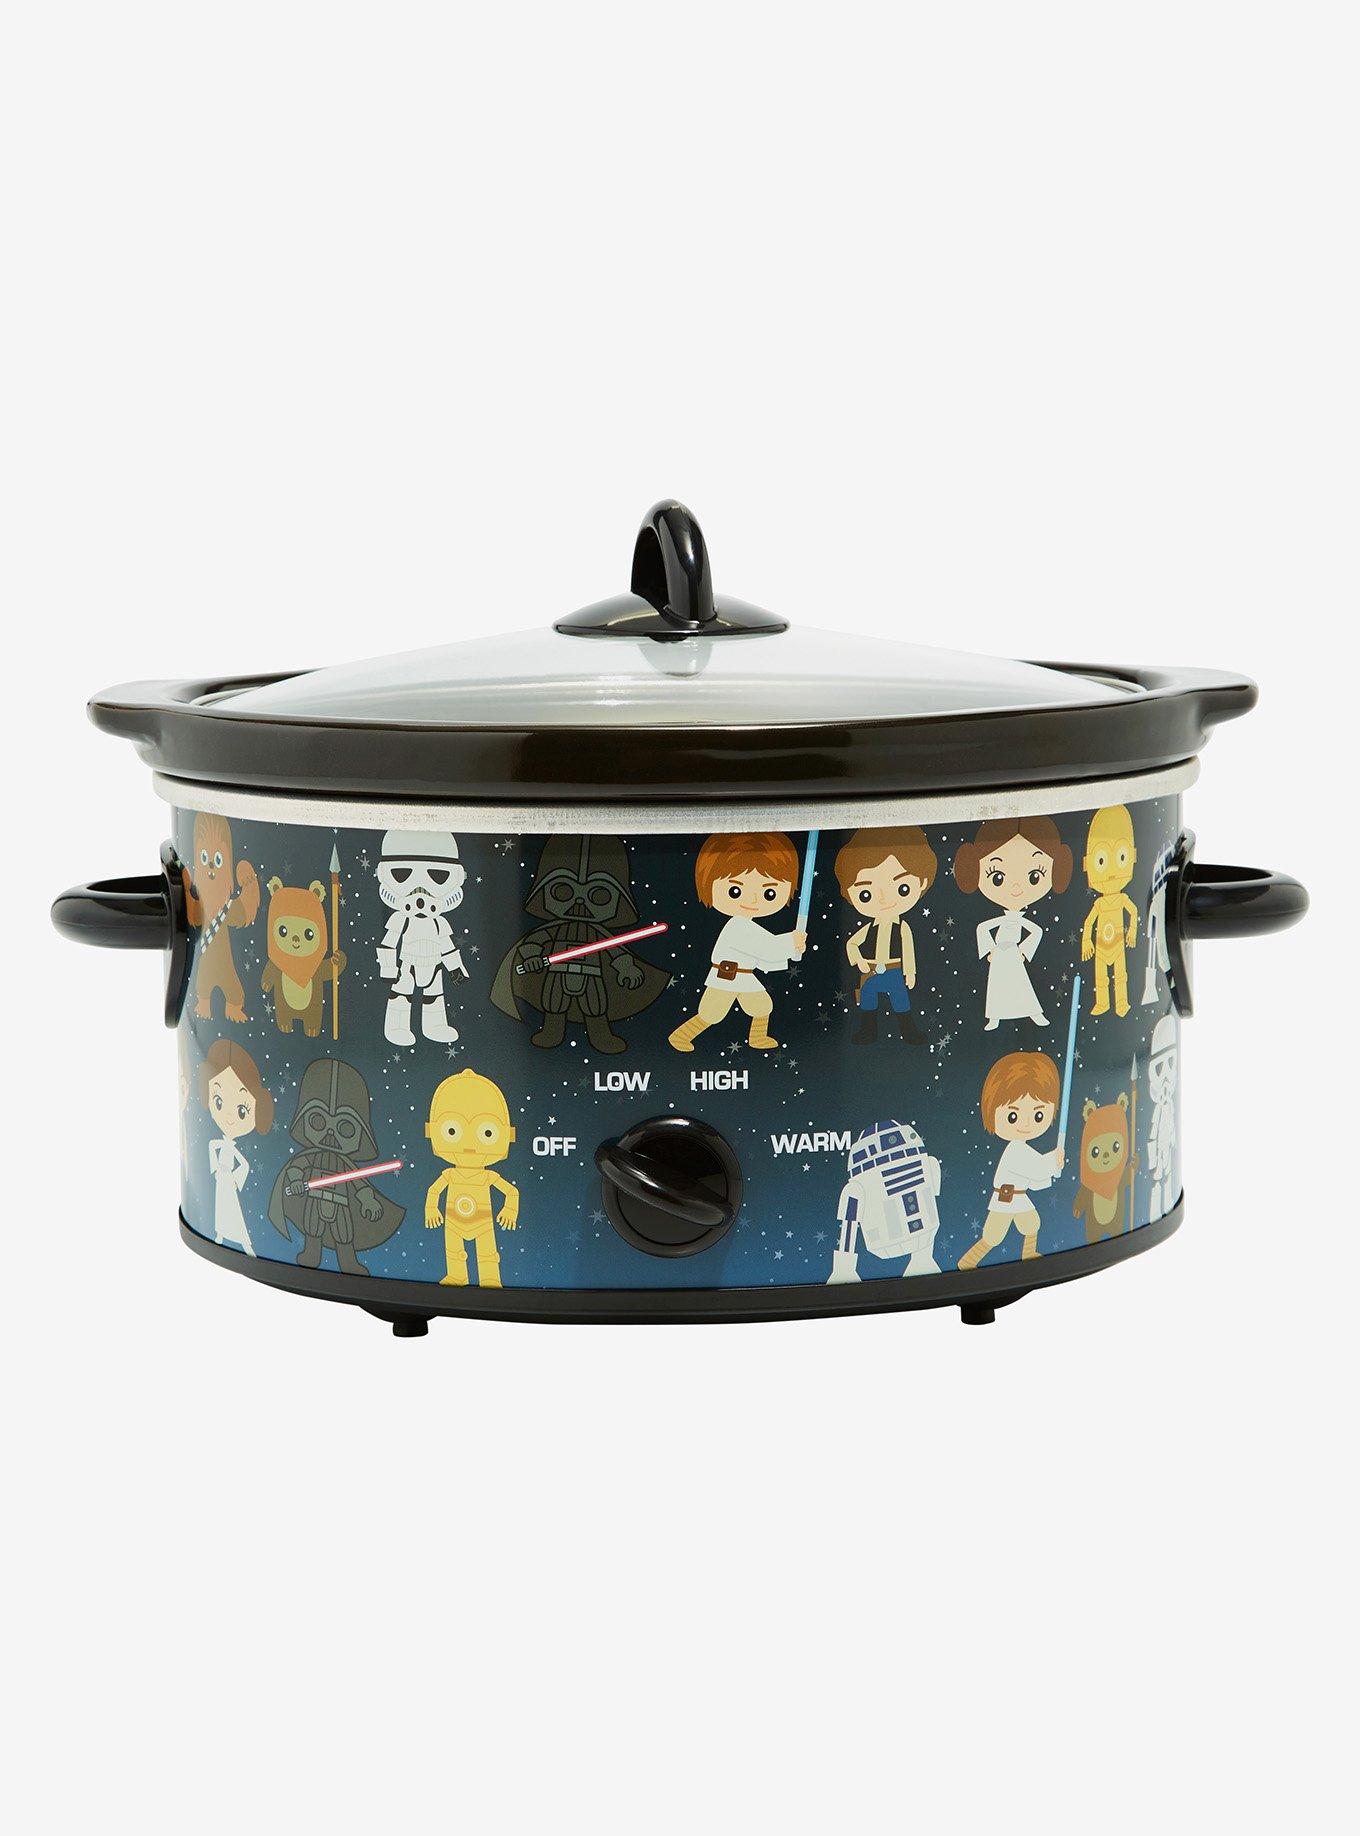 Avatar: The Last Airbender Chibi Characters 7-Quart Slow Cooker